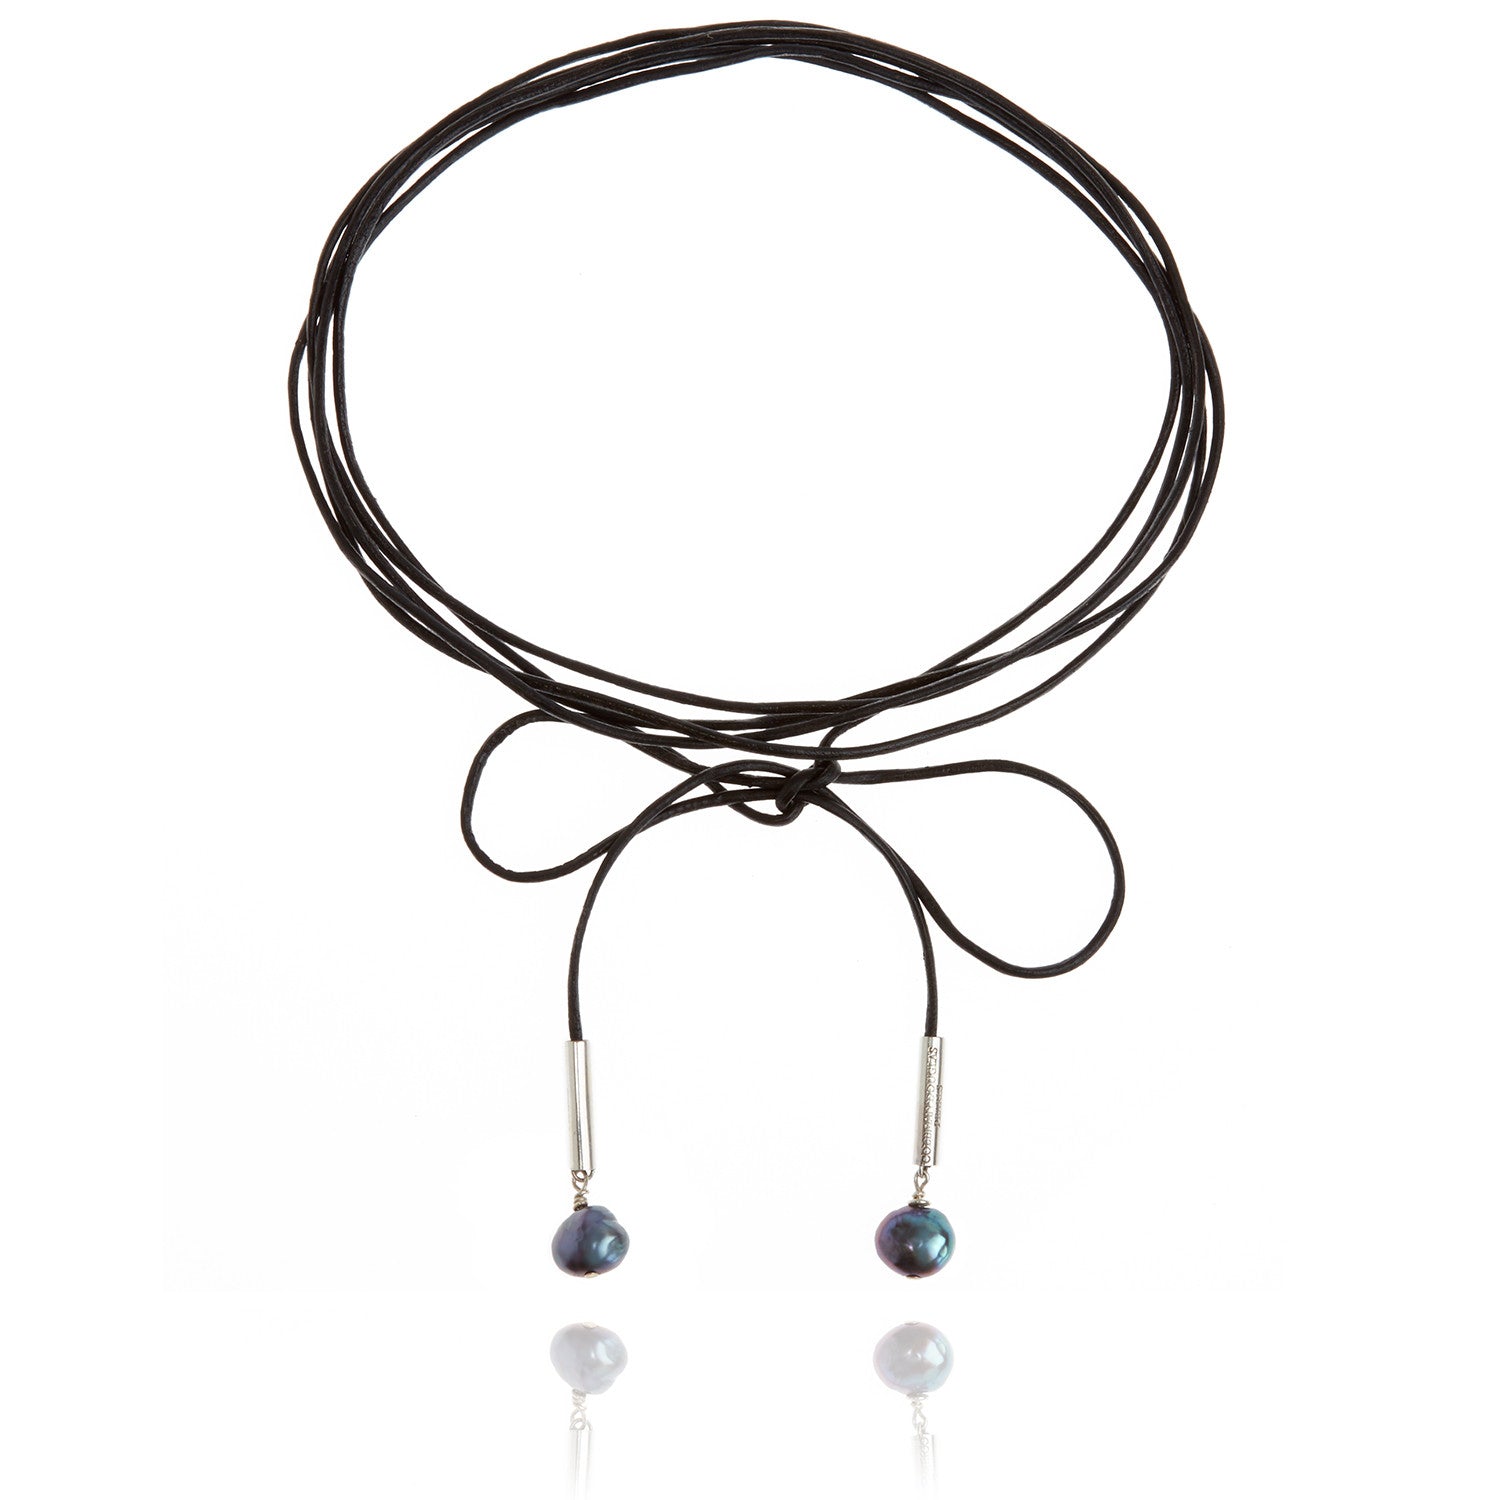 Joyful Black Leather Necklace With Two Pearl Drops